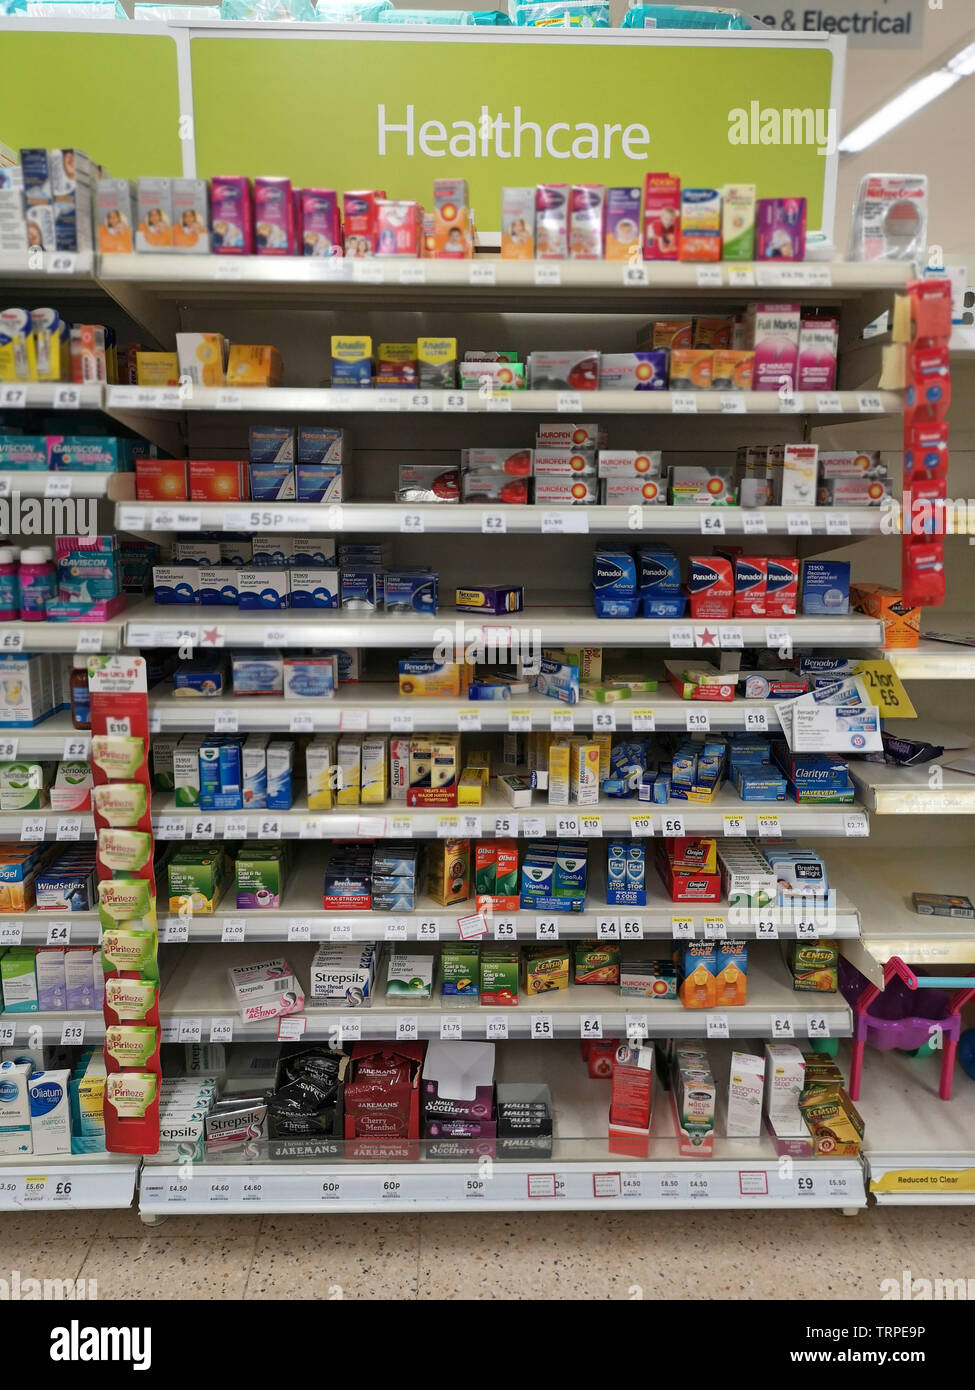 Healthcare in a Tesco supermarket in West London on June 9, 2019. Stock Photo